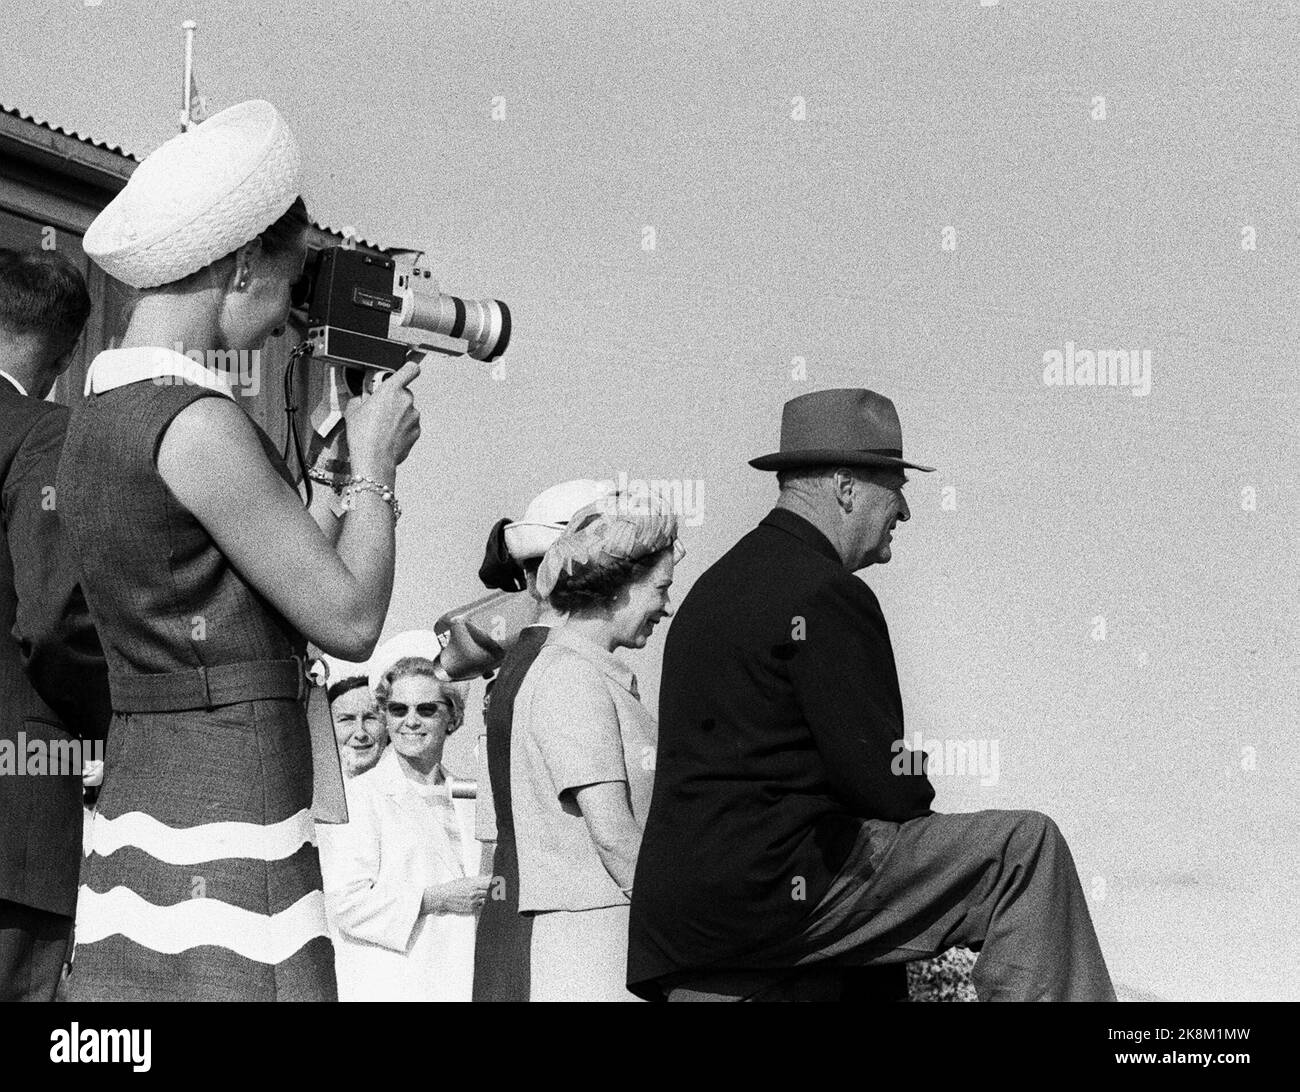 Molde 19690809. Queen Elizabeth II visiting Norway with the family. Here they are on jumping in Molde where crown prince Sonja movies the event. Eg. Crown Princess Sonja, Queen Elizabeth and King Olav. Ntb archive Stock Photo